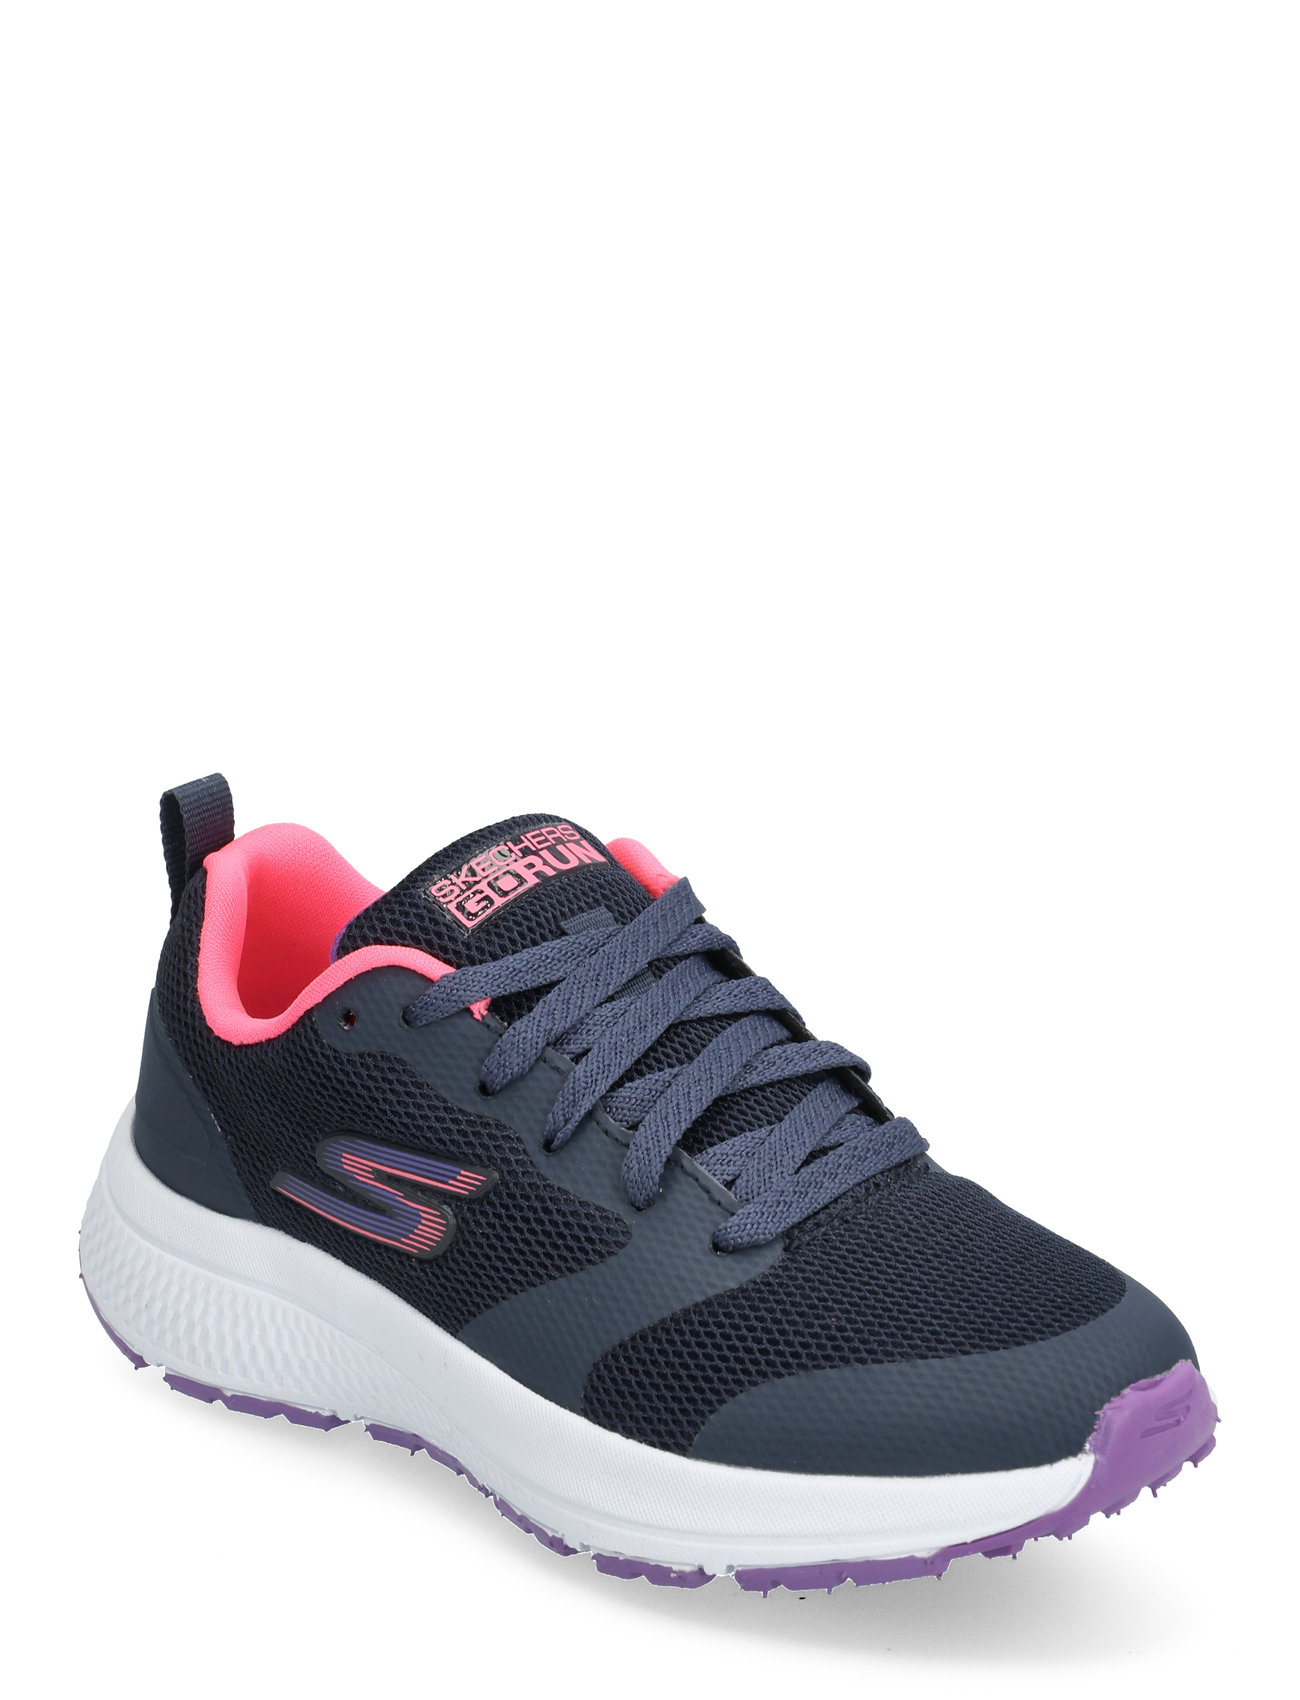 Girls Gorun Consistent - Bright Logics Shoes Sports Shoes Running-training Shoes Navy Skechers